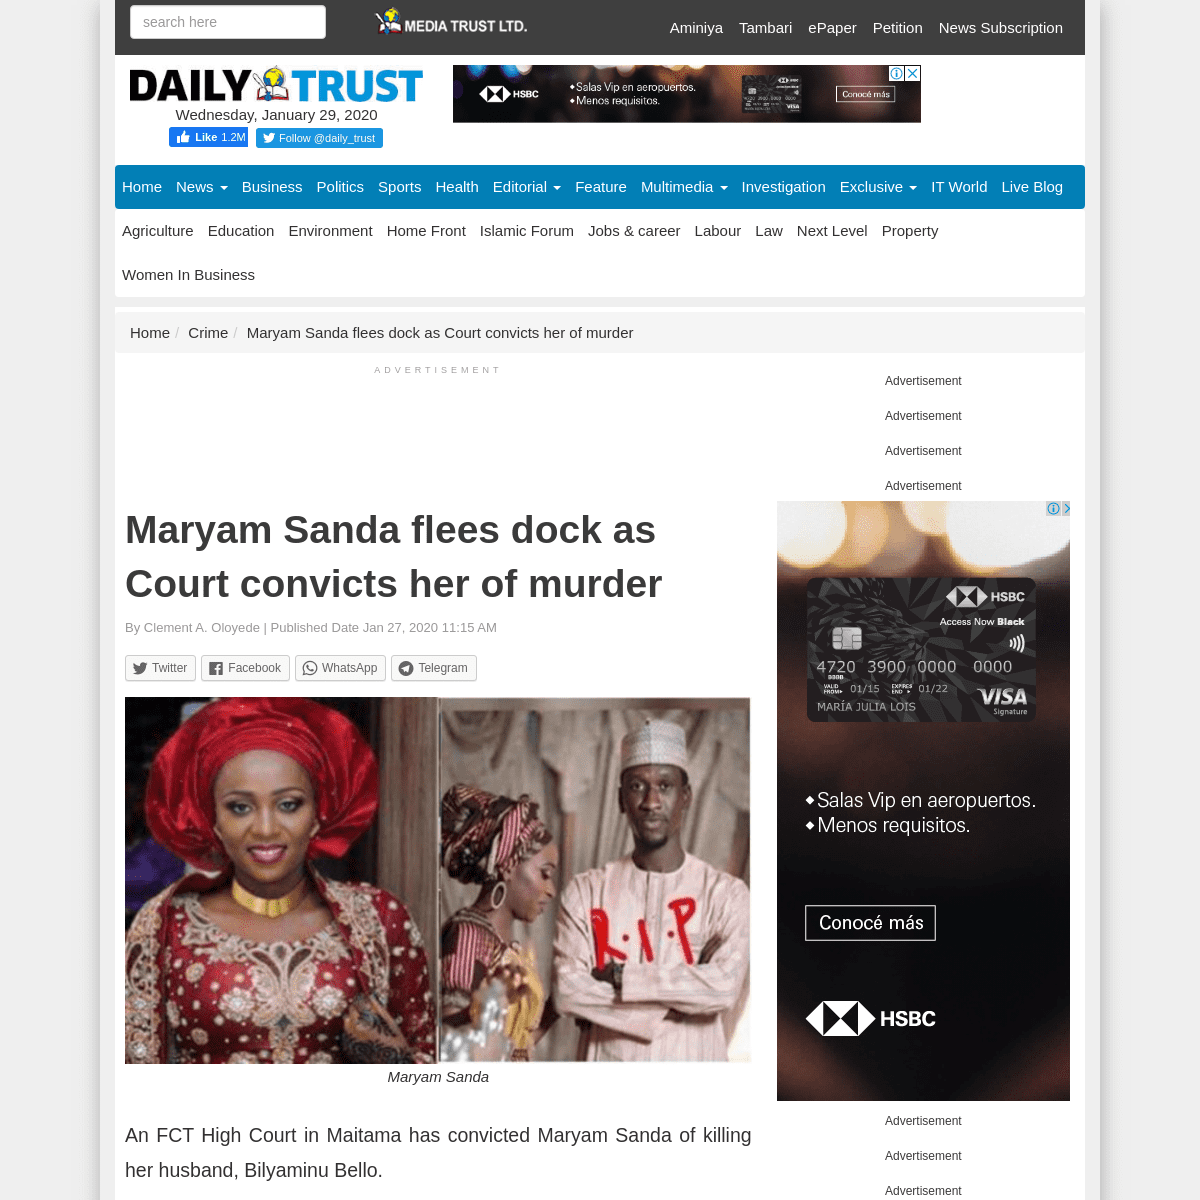 A complete backup of www.dailytrust.com.ng/breaking-maryam-sanda-flees-as-court-convicts-her-of-murder.html